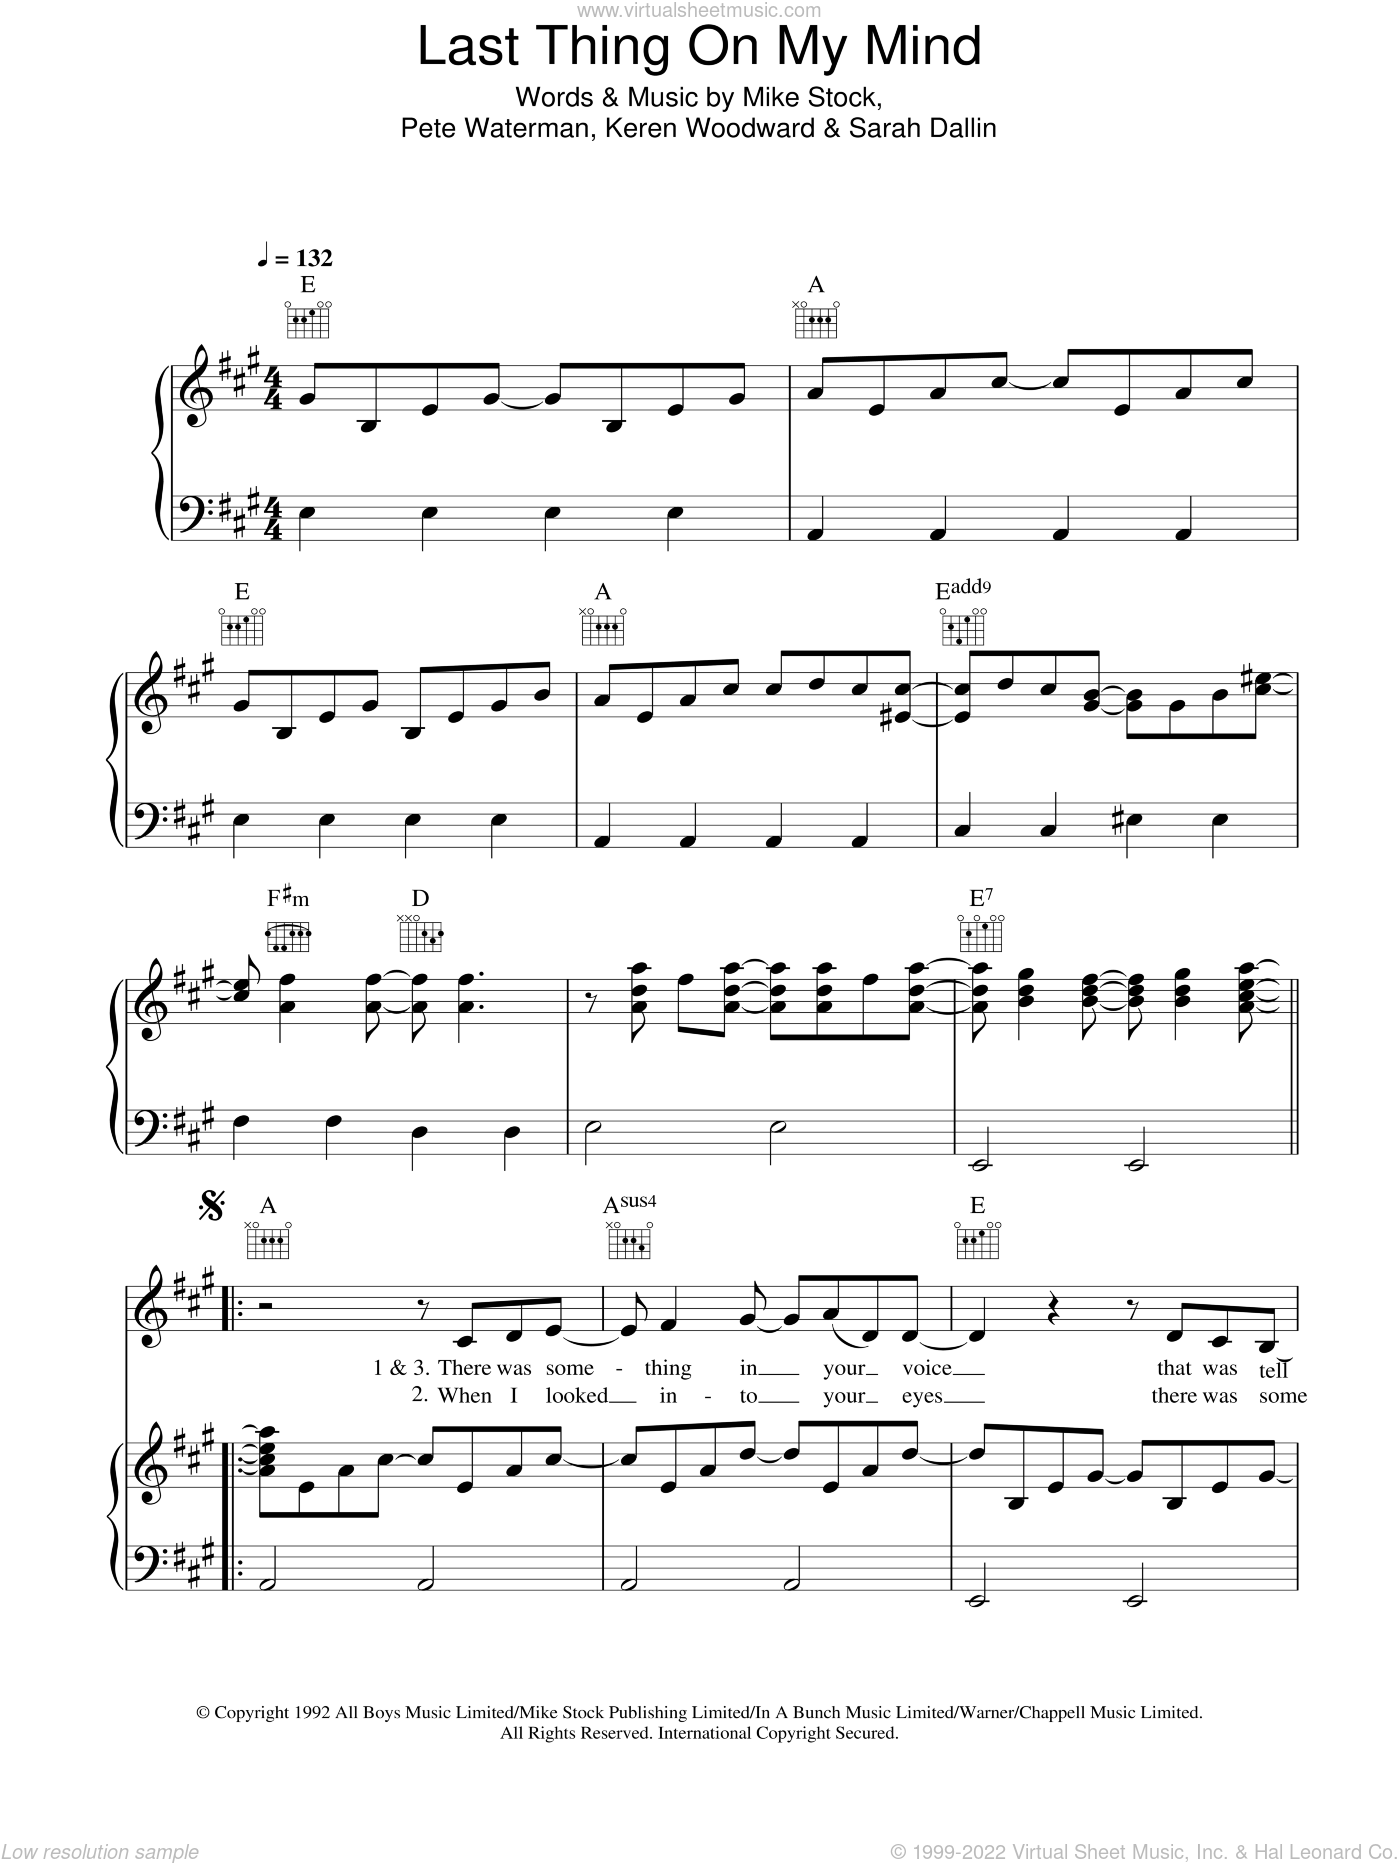 Steps - Last Thing On My Mind sheet music for voice, piano or guitar